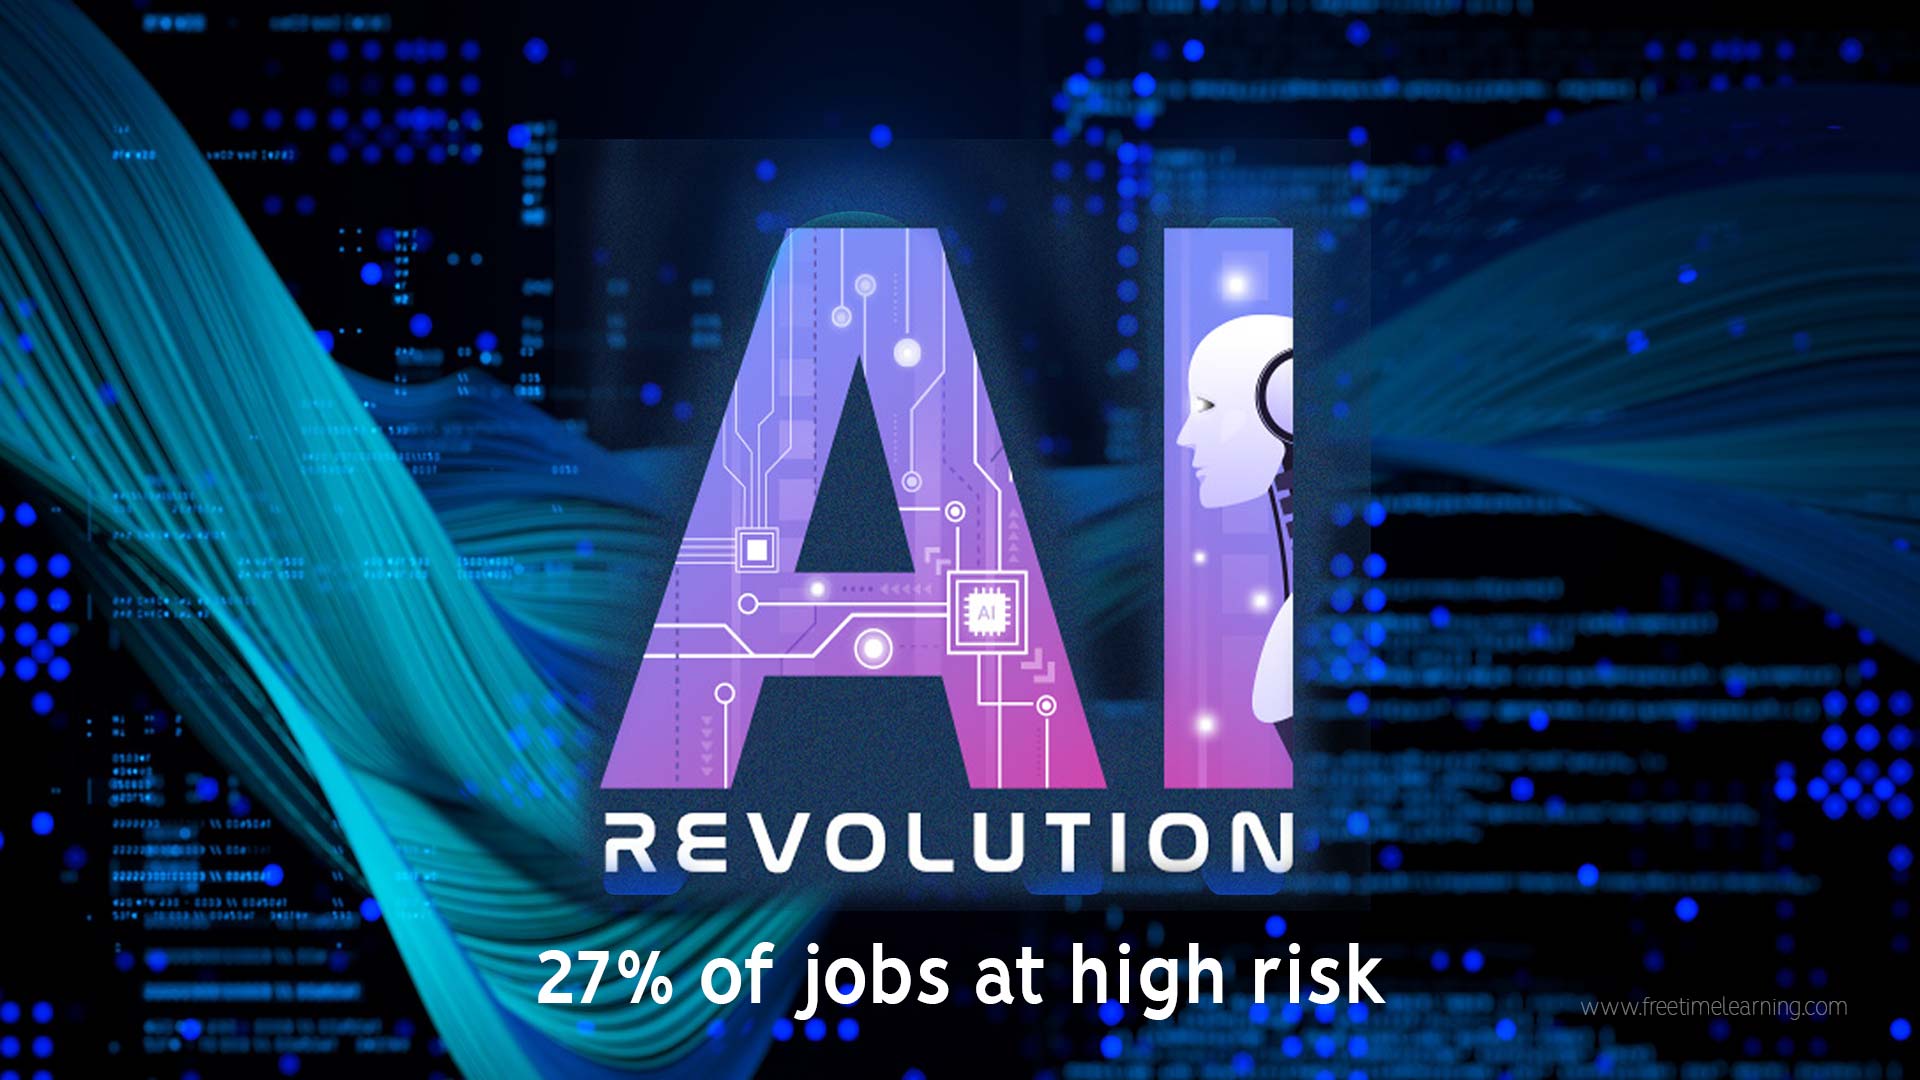 OECD Says, 27% of Jobs at High Risk From AI Revolution